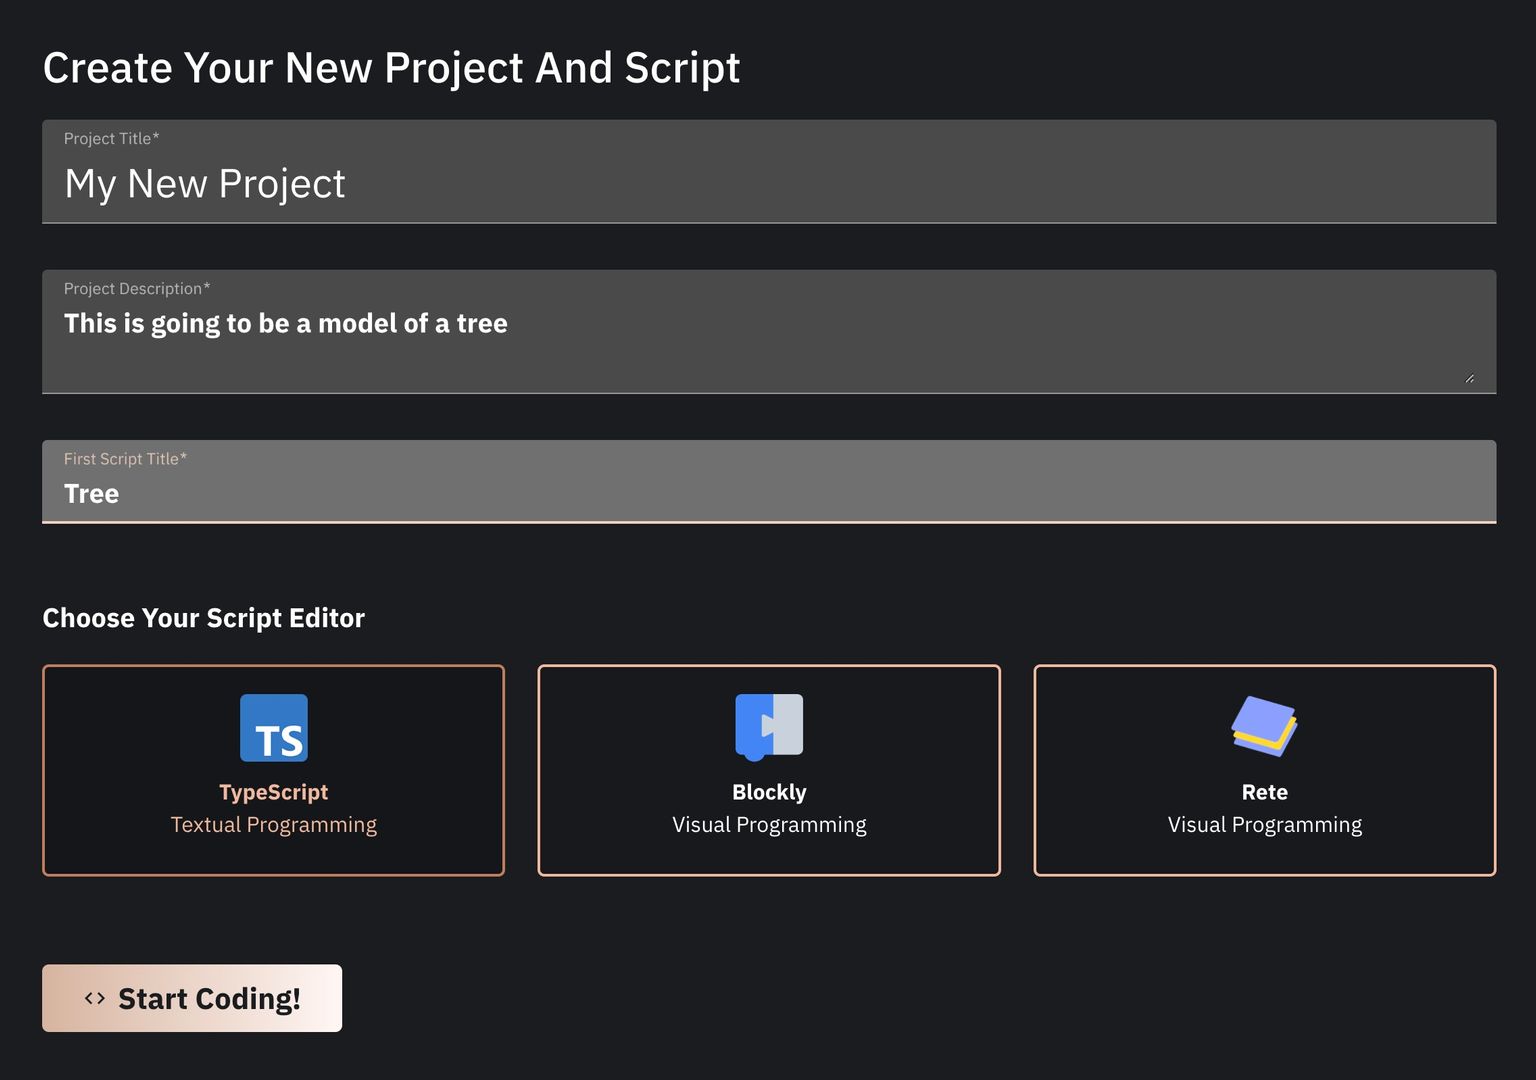 Image showing the form for creating a new project